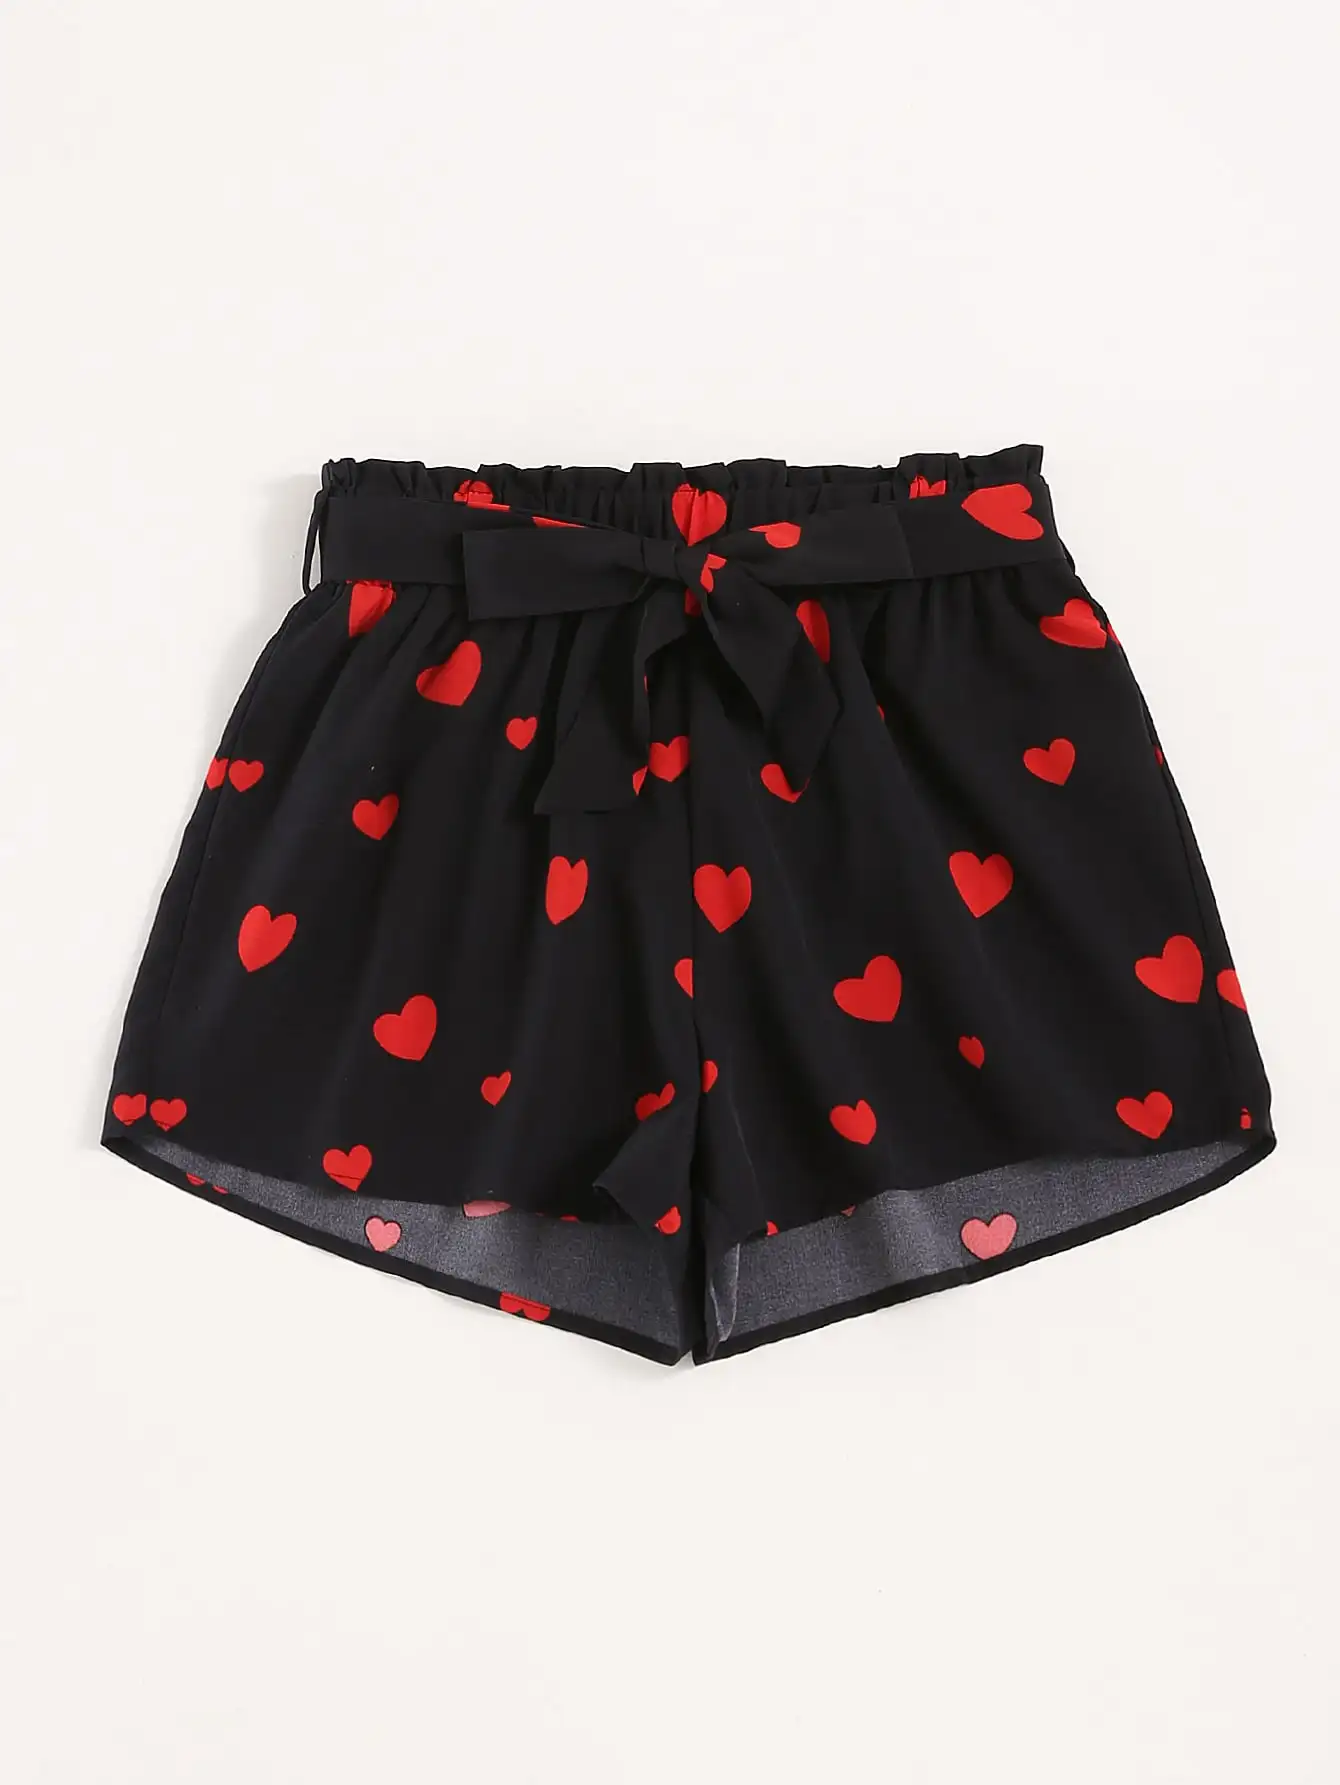 

Finjani Women's Shorts Allover Heart Print Belted Shorts High Waist Sweet Casual Clothing For Summer 2023